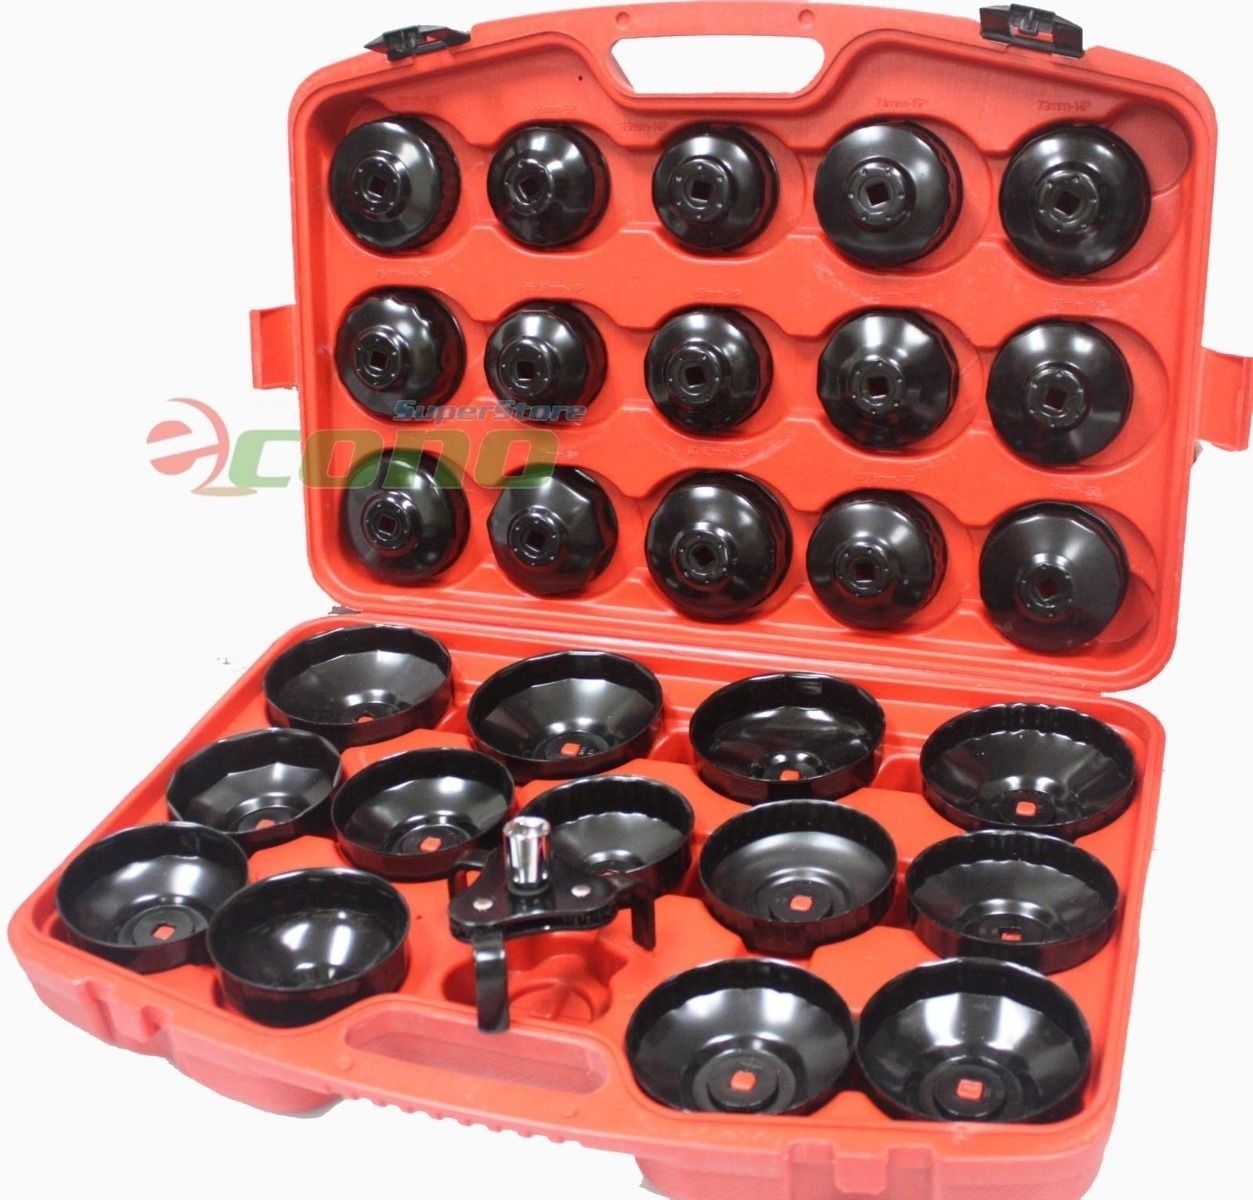 30pcs Oil Filter Cap Wrench Cup Socket Tool Set Mercedes BMW VW Audi Volvo Ford 